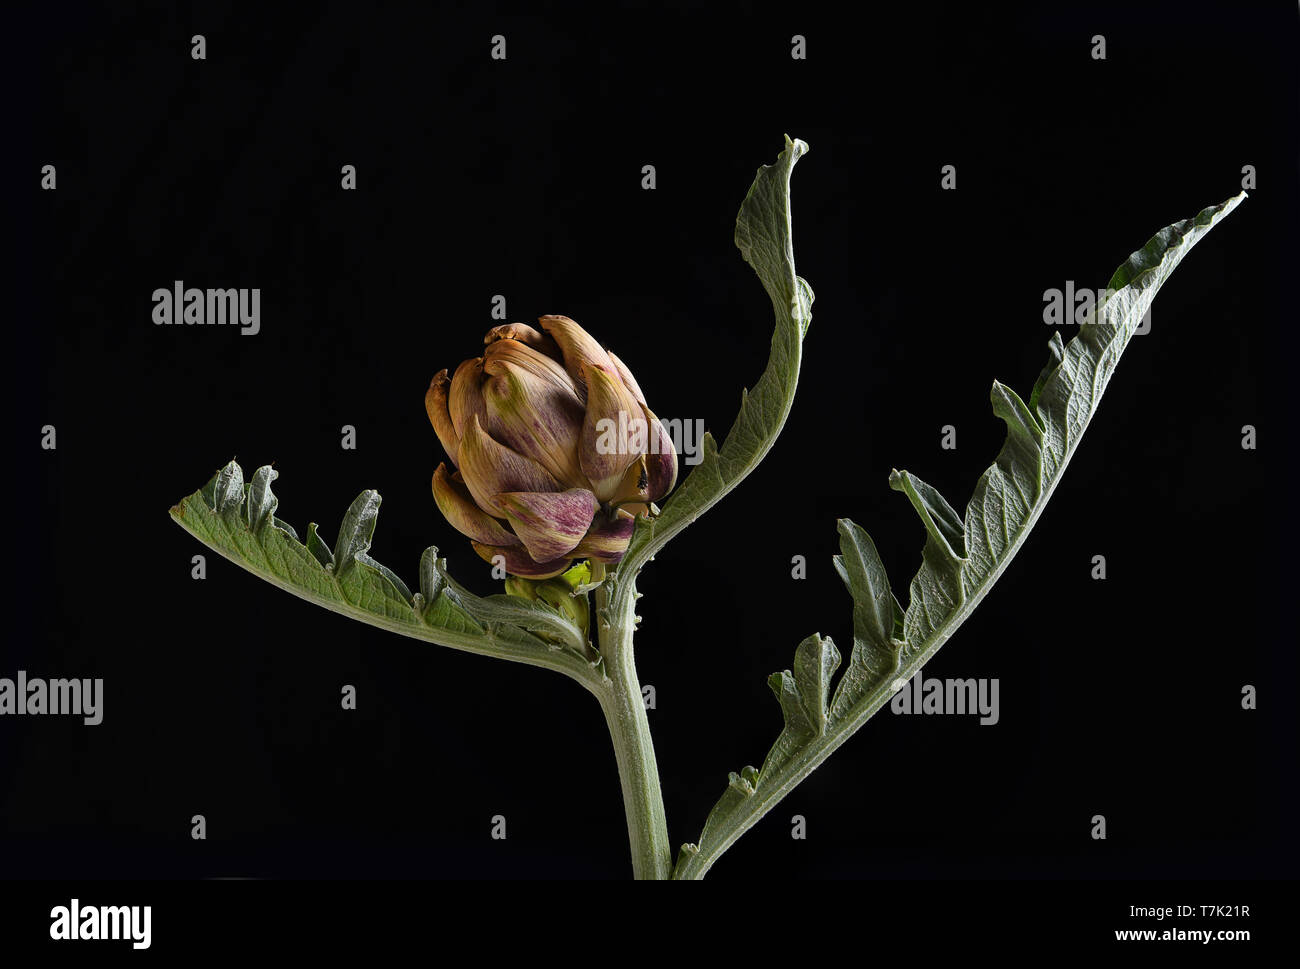 Still life closeup of a small dried artichoke against a black background. Stock Photo